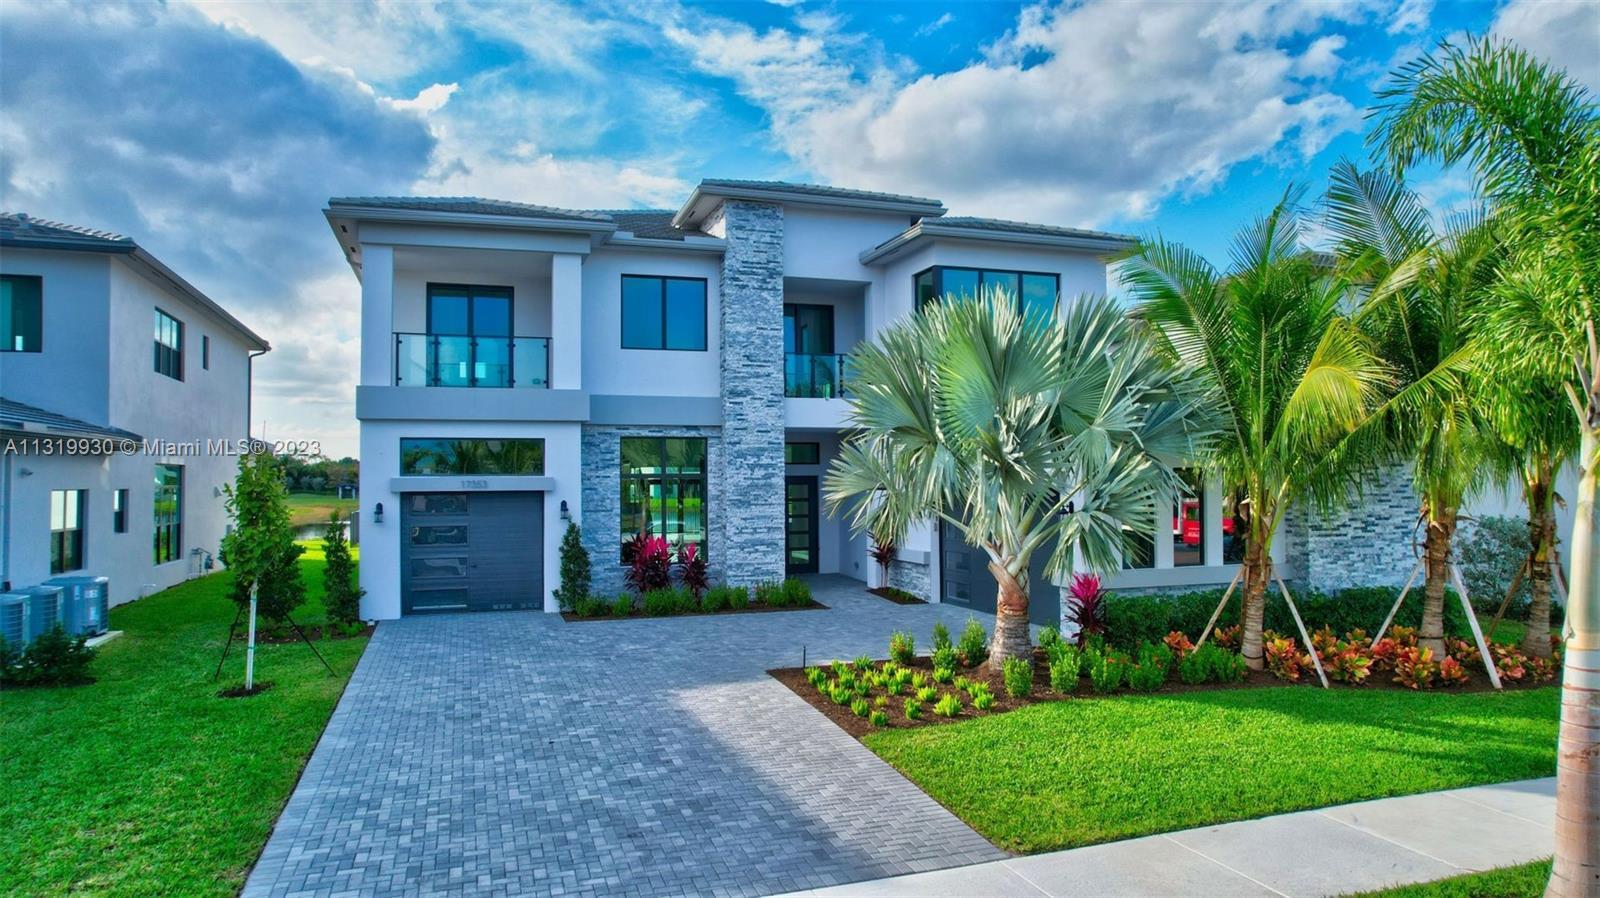 Set in the highly sought after community of Boca Bridges, this brand new and never lived in Veneto m